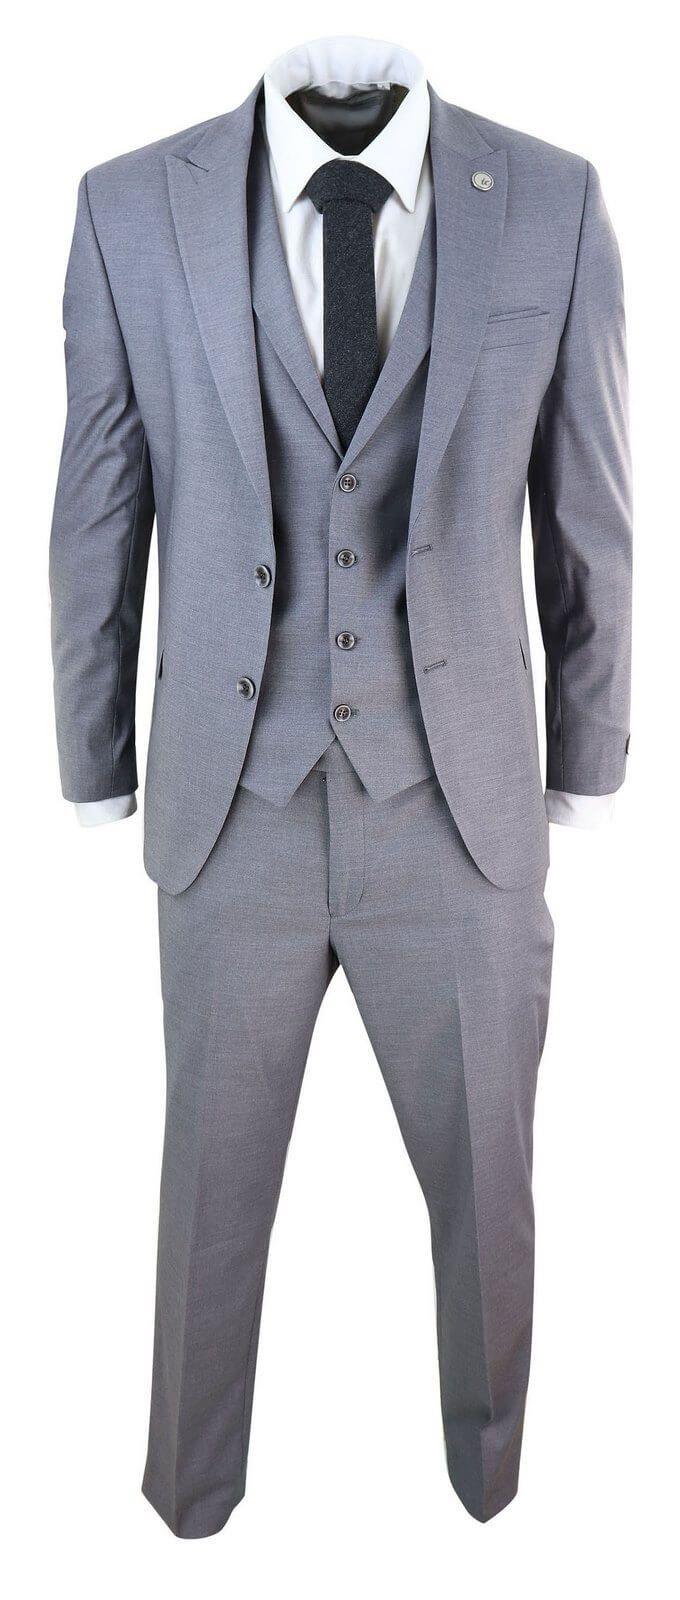 New Mens 3 Piece Suit Plain Grey Classic Tailored Fit Smart Casual 1920s Formal - Upperclass Fashions 